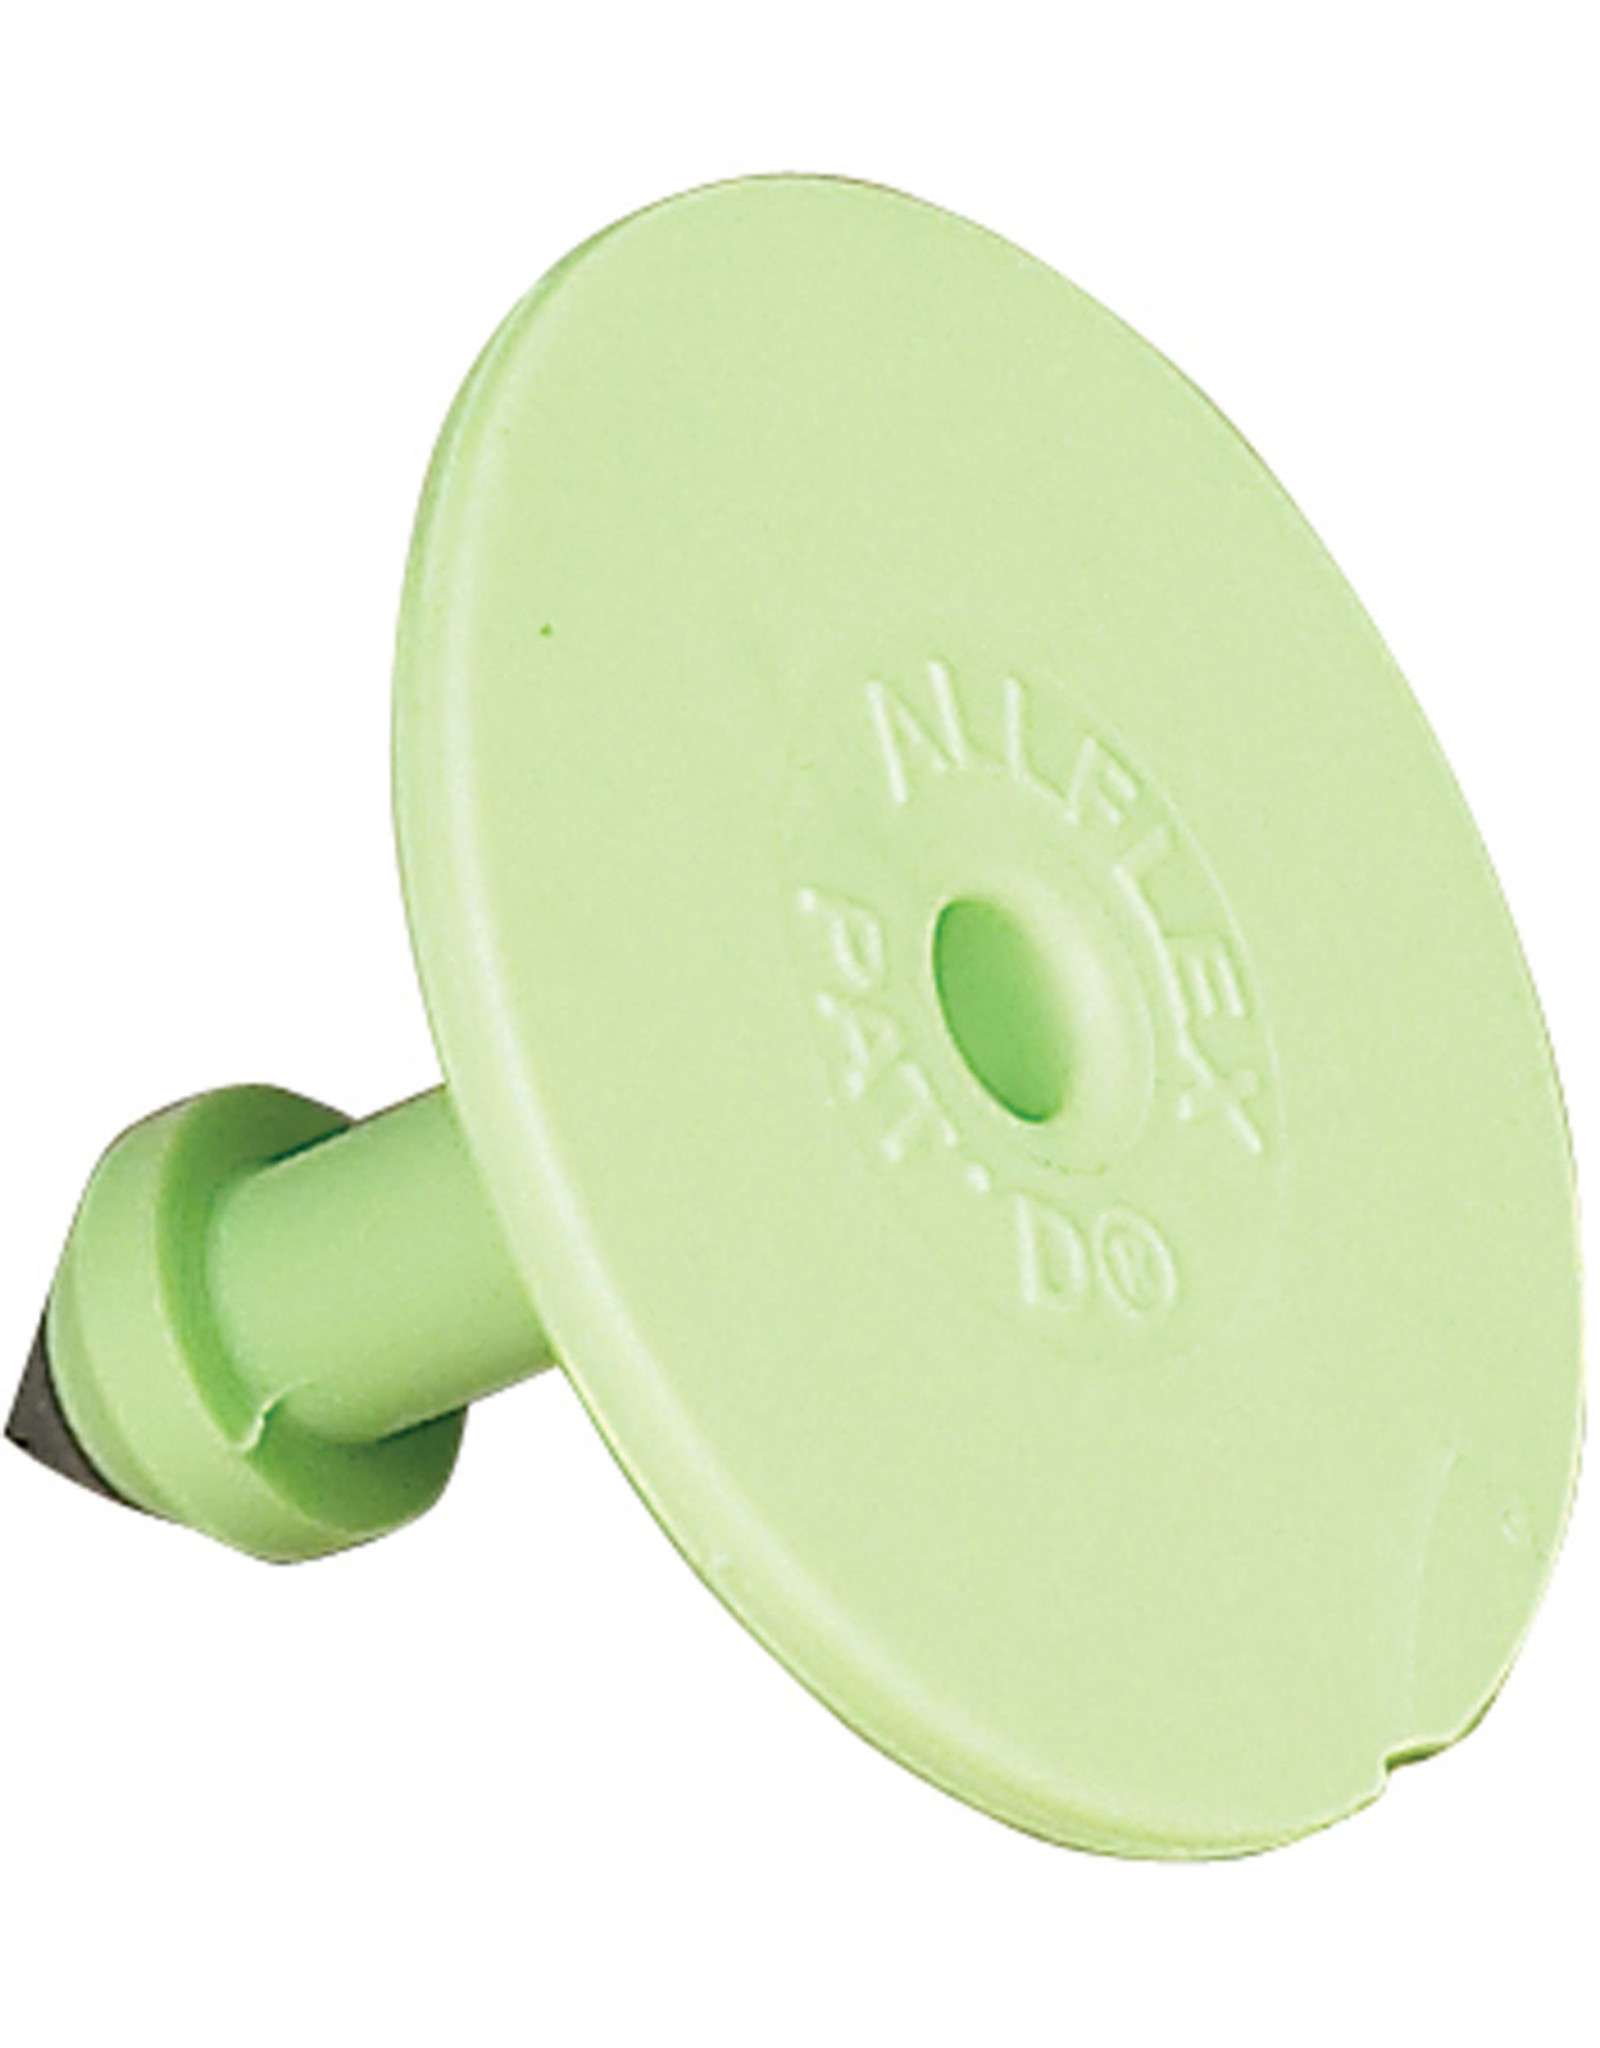 TAG* Allflex BUTTONS Sml Male 25s - Green GSMGR00